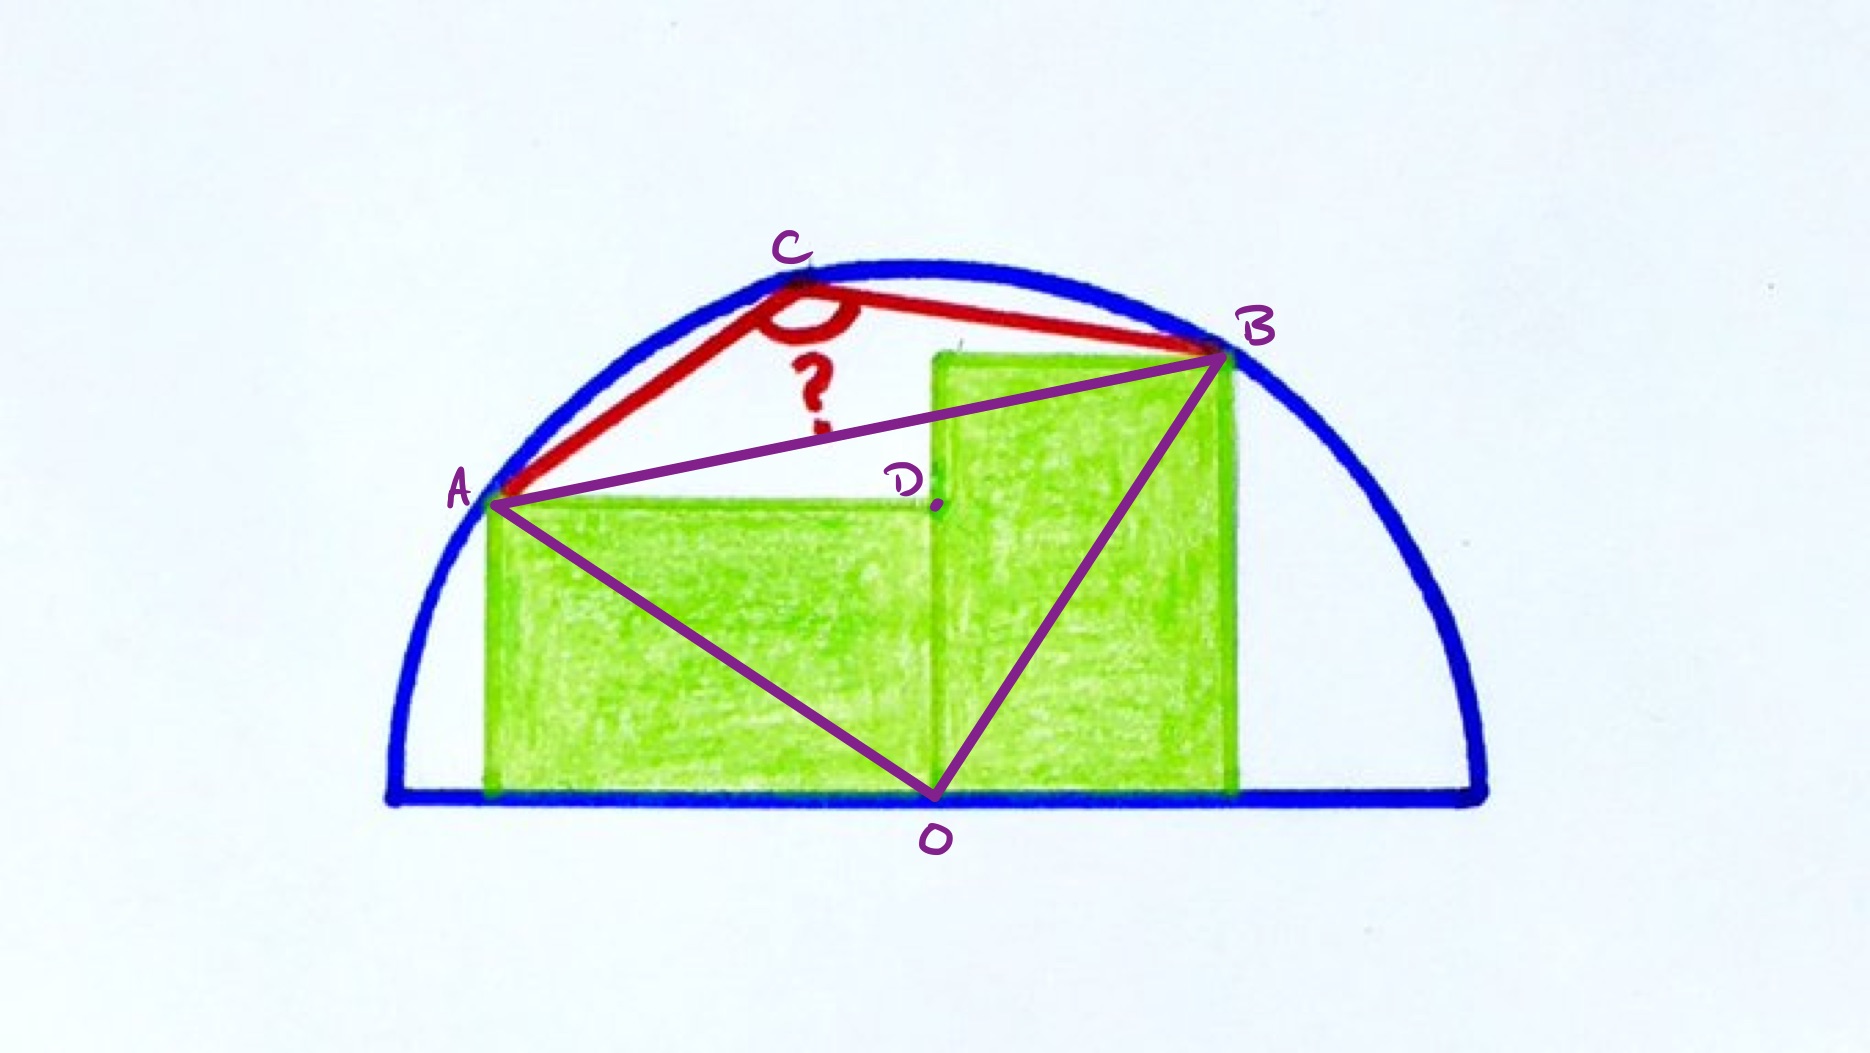 Two rectangles in a semi-circle labelled